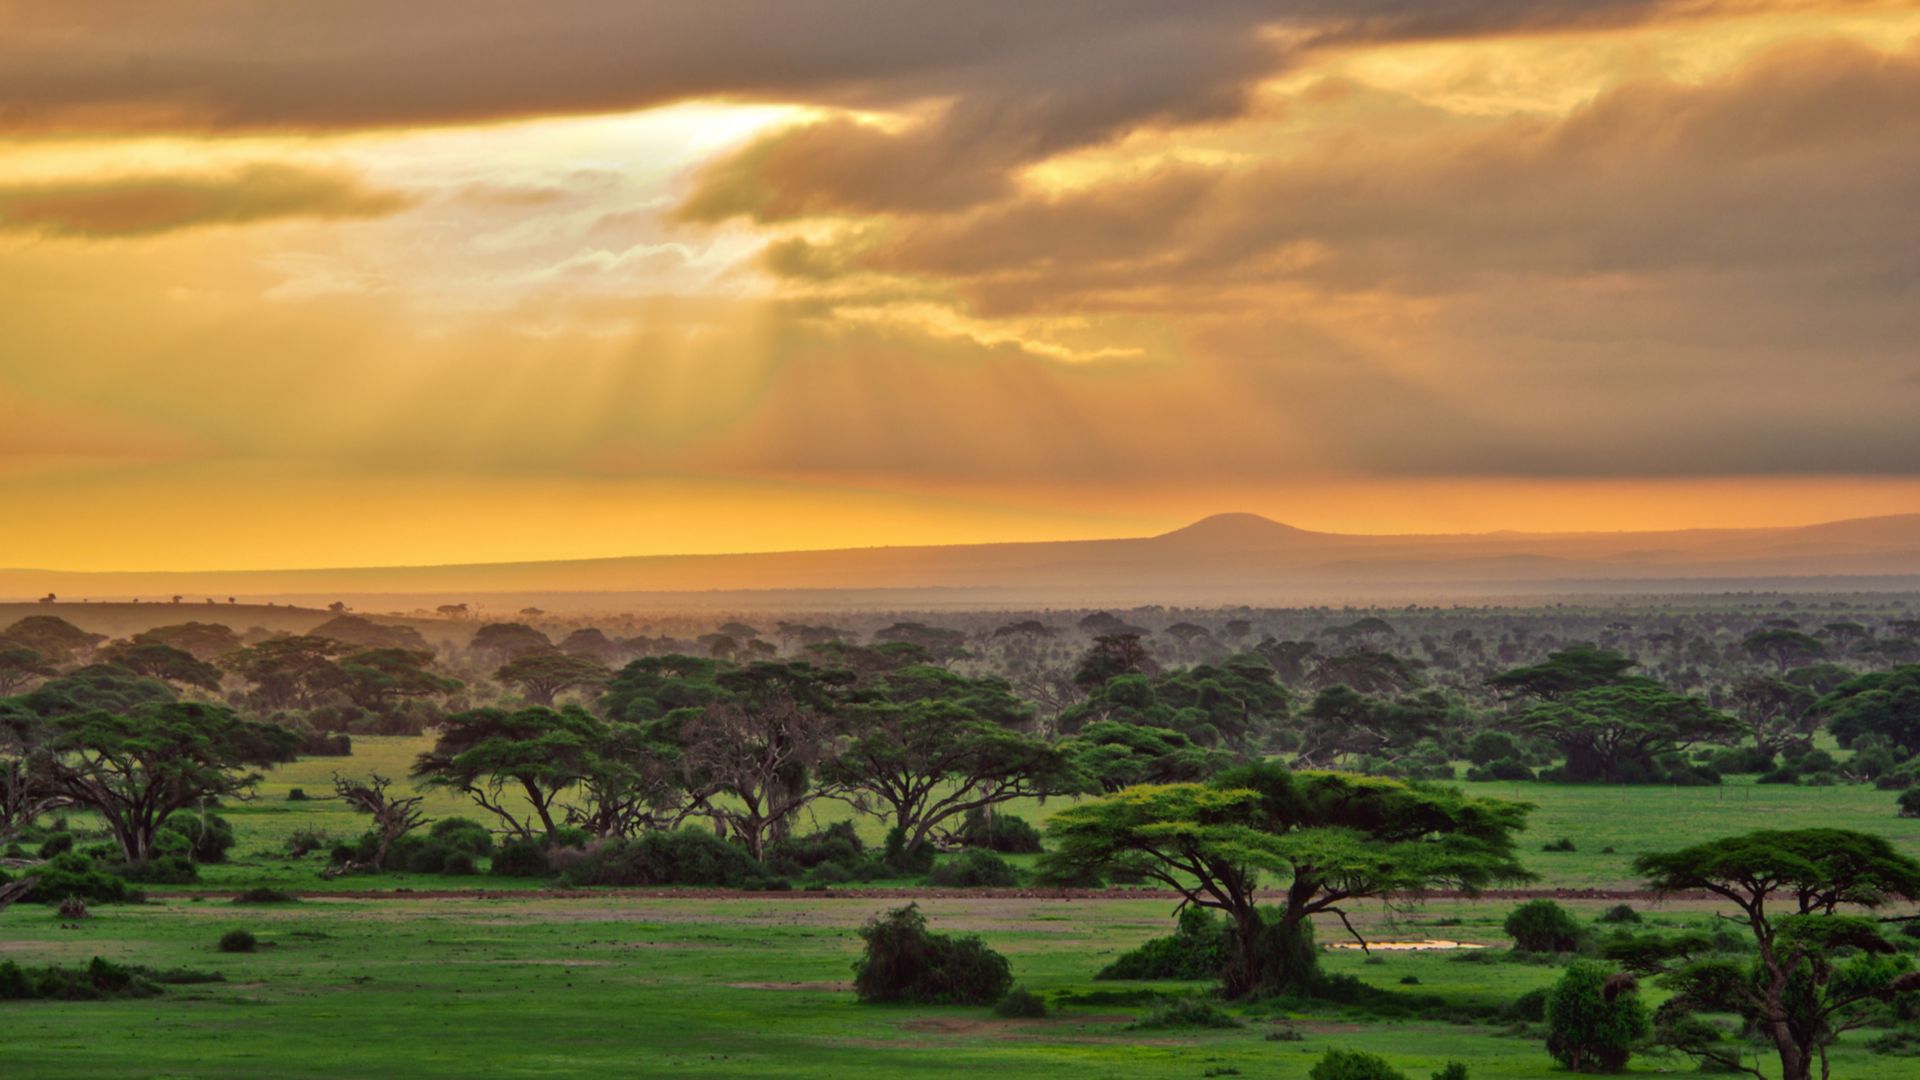 Tanzania is a land of superlatives, from haunting landscape to one of the greatest wildlife spectacles on the planet